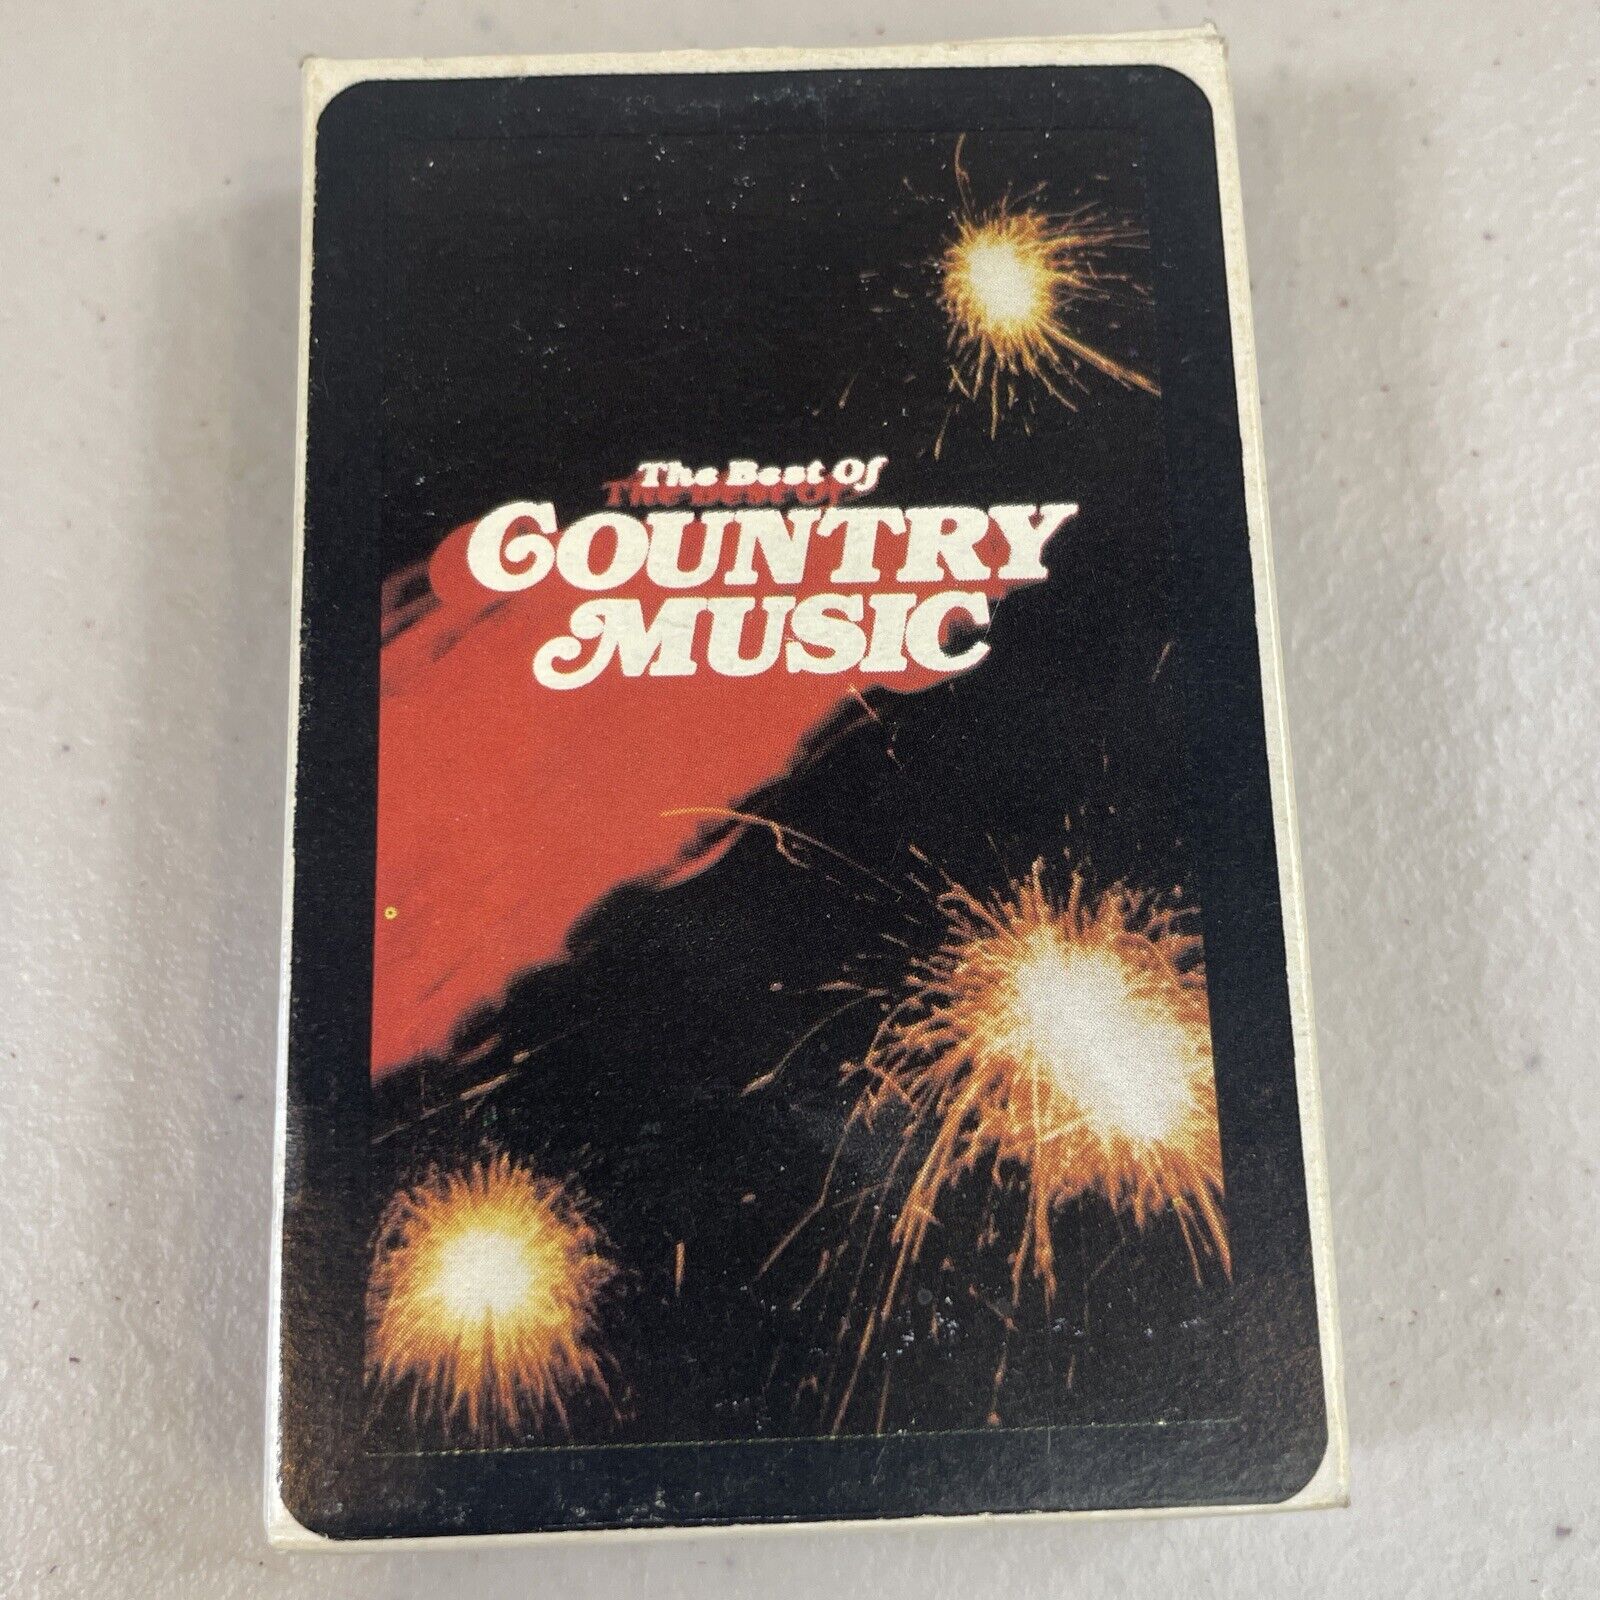 NOS Vintage 1982 The Best of Country Music - Deck of 54 Playing Cards